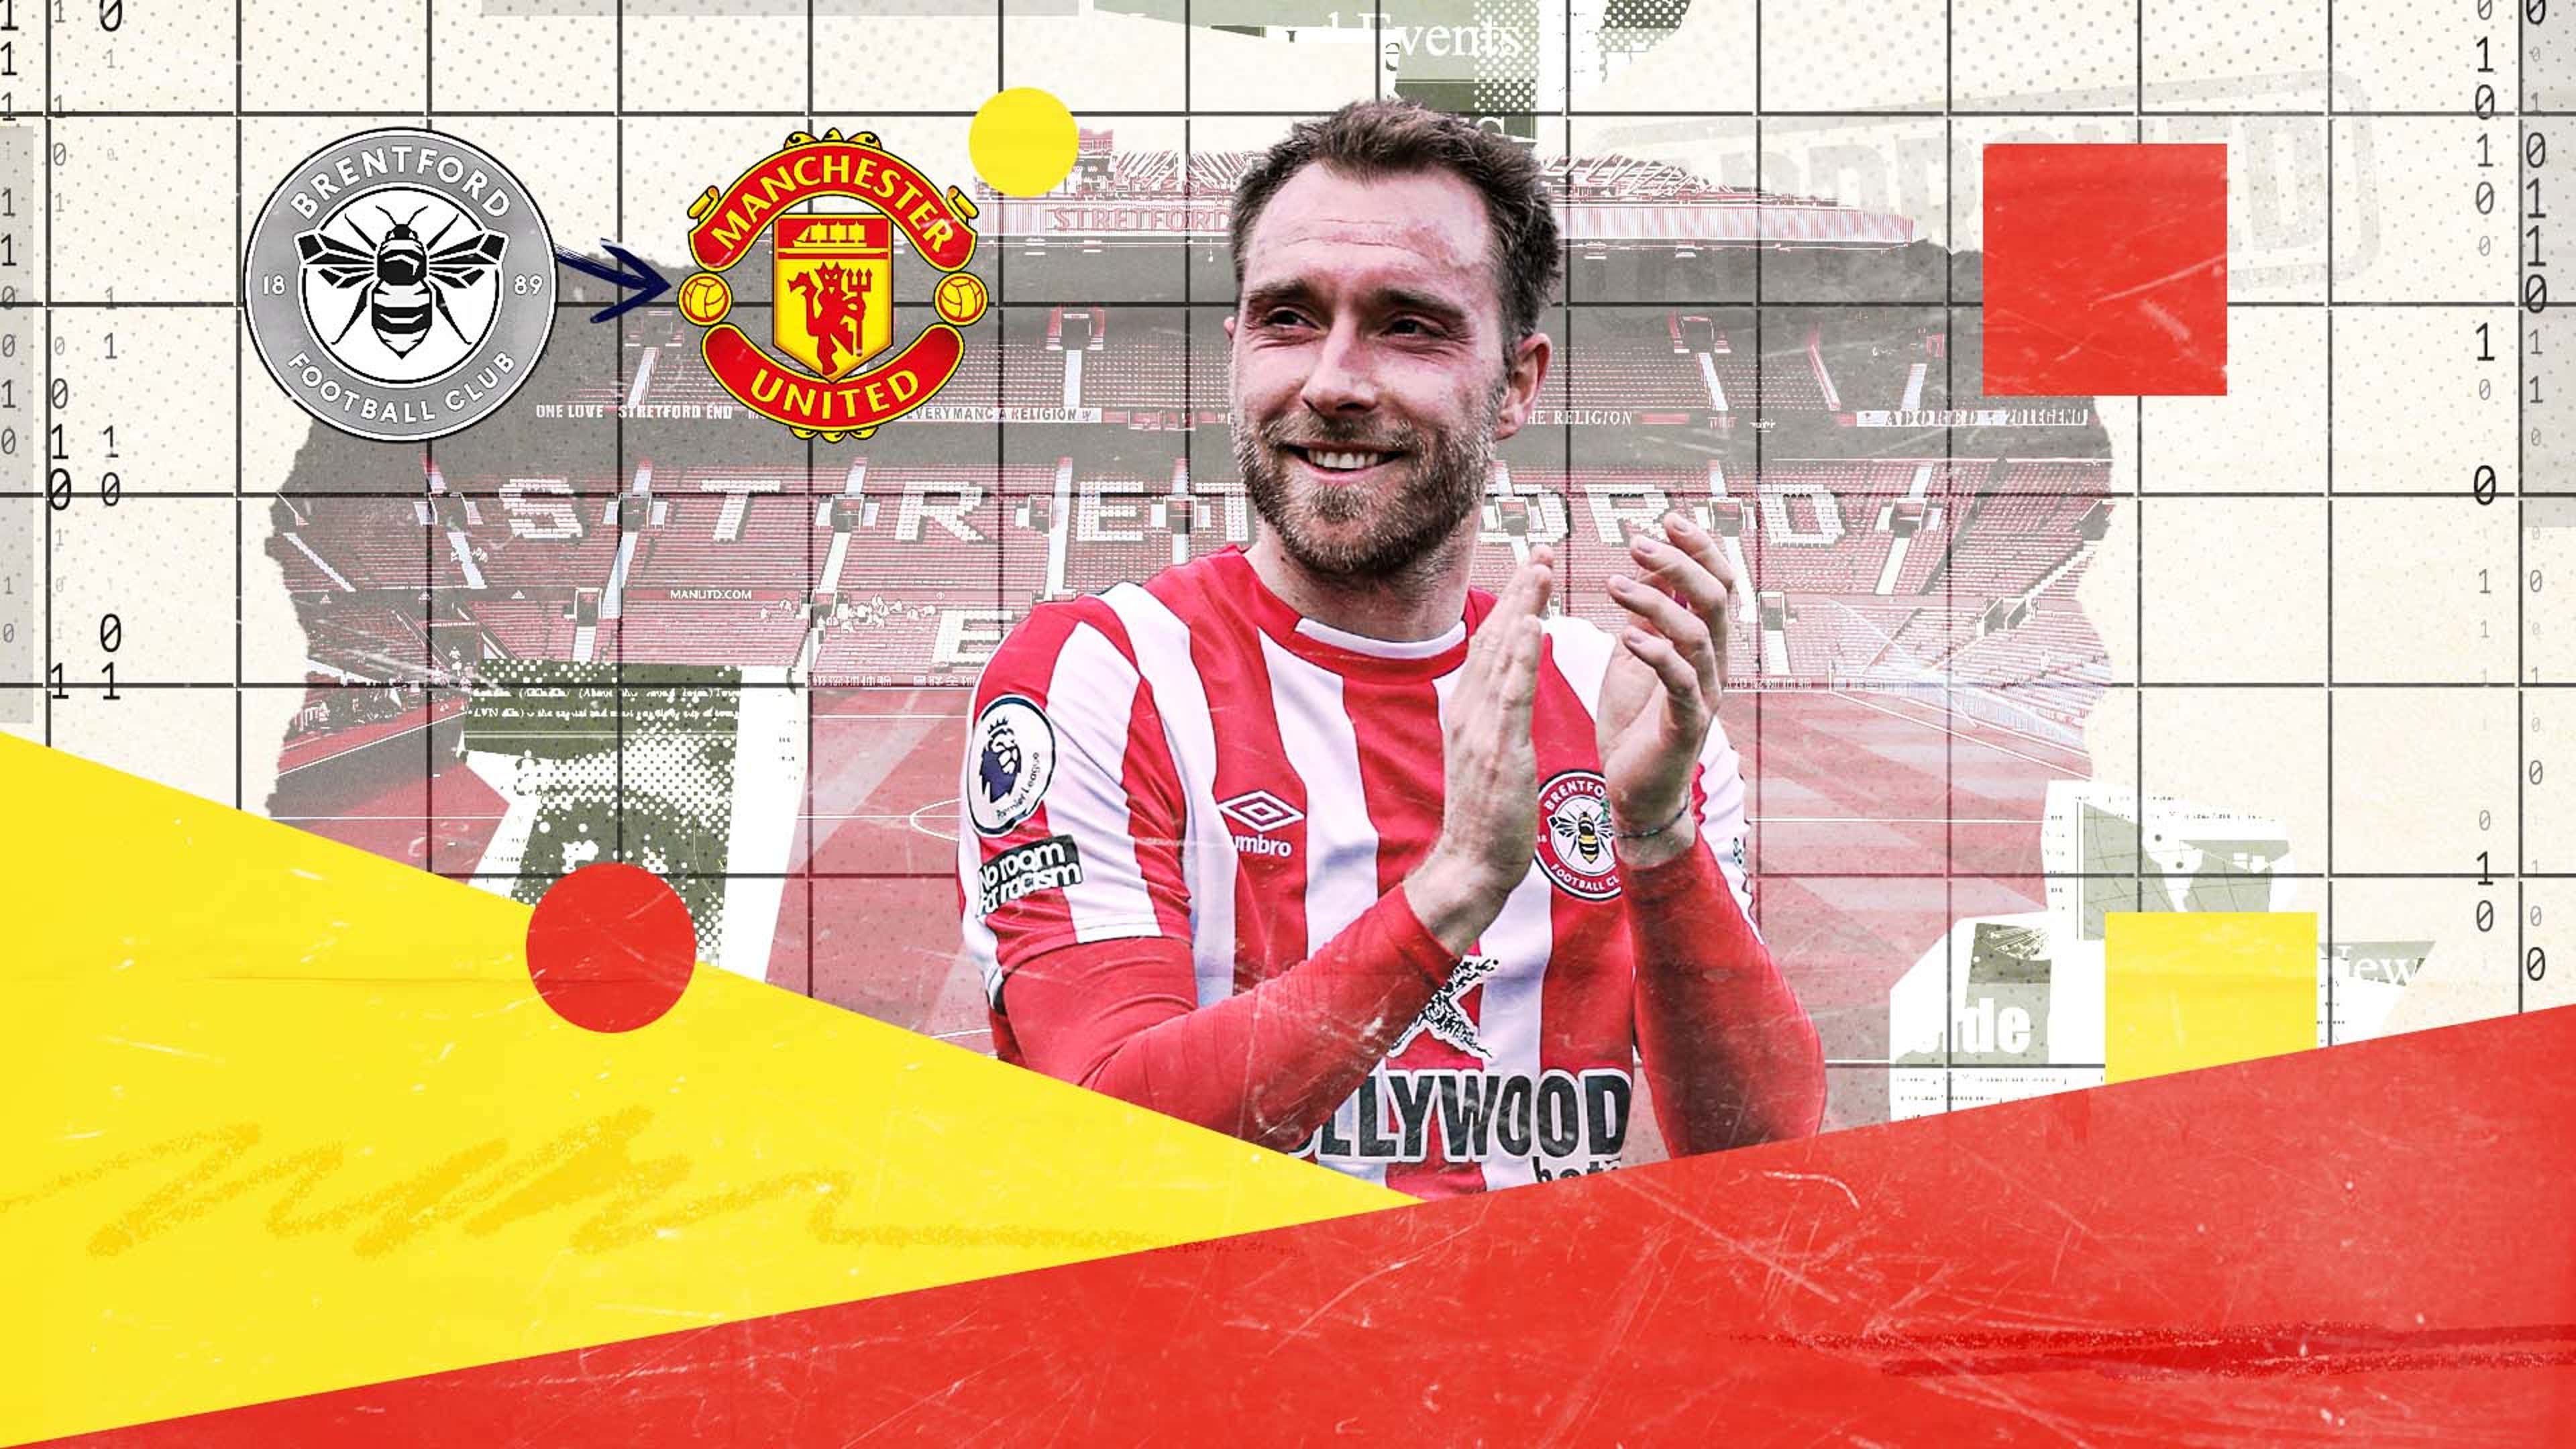 Christian Eriksen career to date after joining Man Utd July 2022